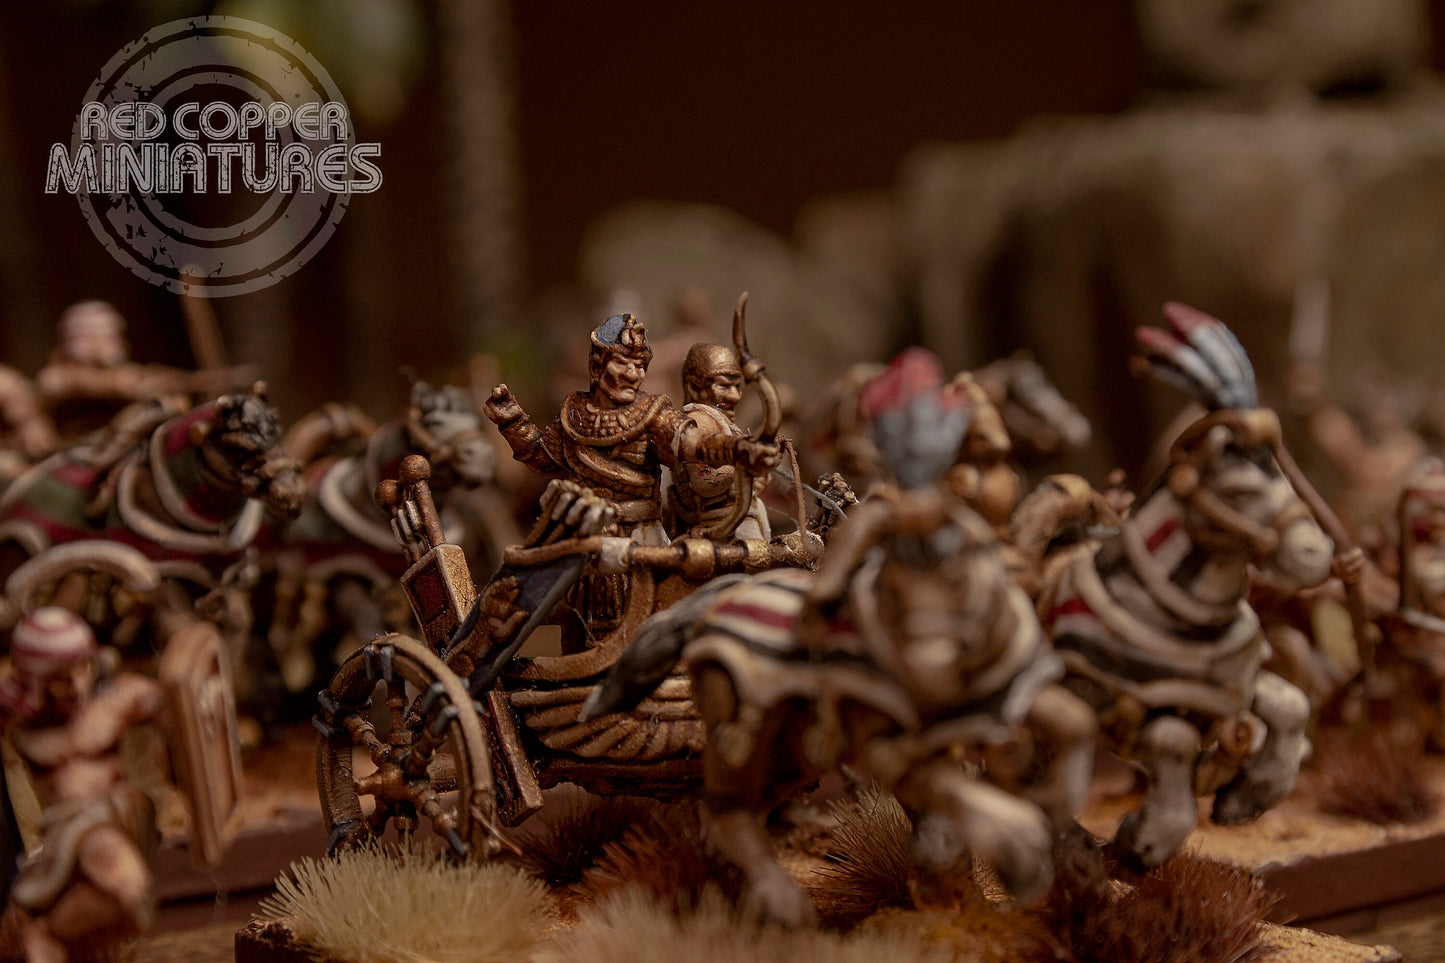 Pharaoh Ramses II on Chariot | New Kingdom of Egypt | 15 & 28mm | Resin 3D Printed | Red Copper Miniatures | Table Top Historical Gaming